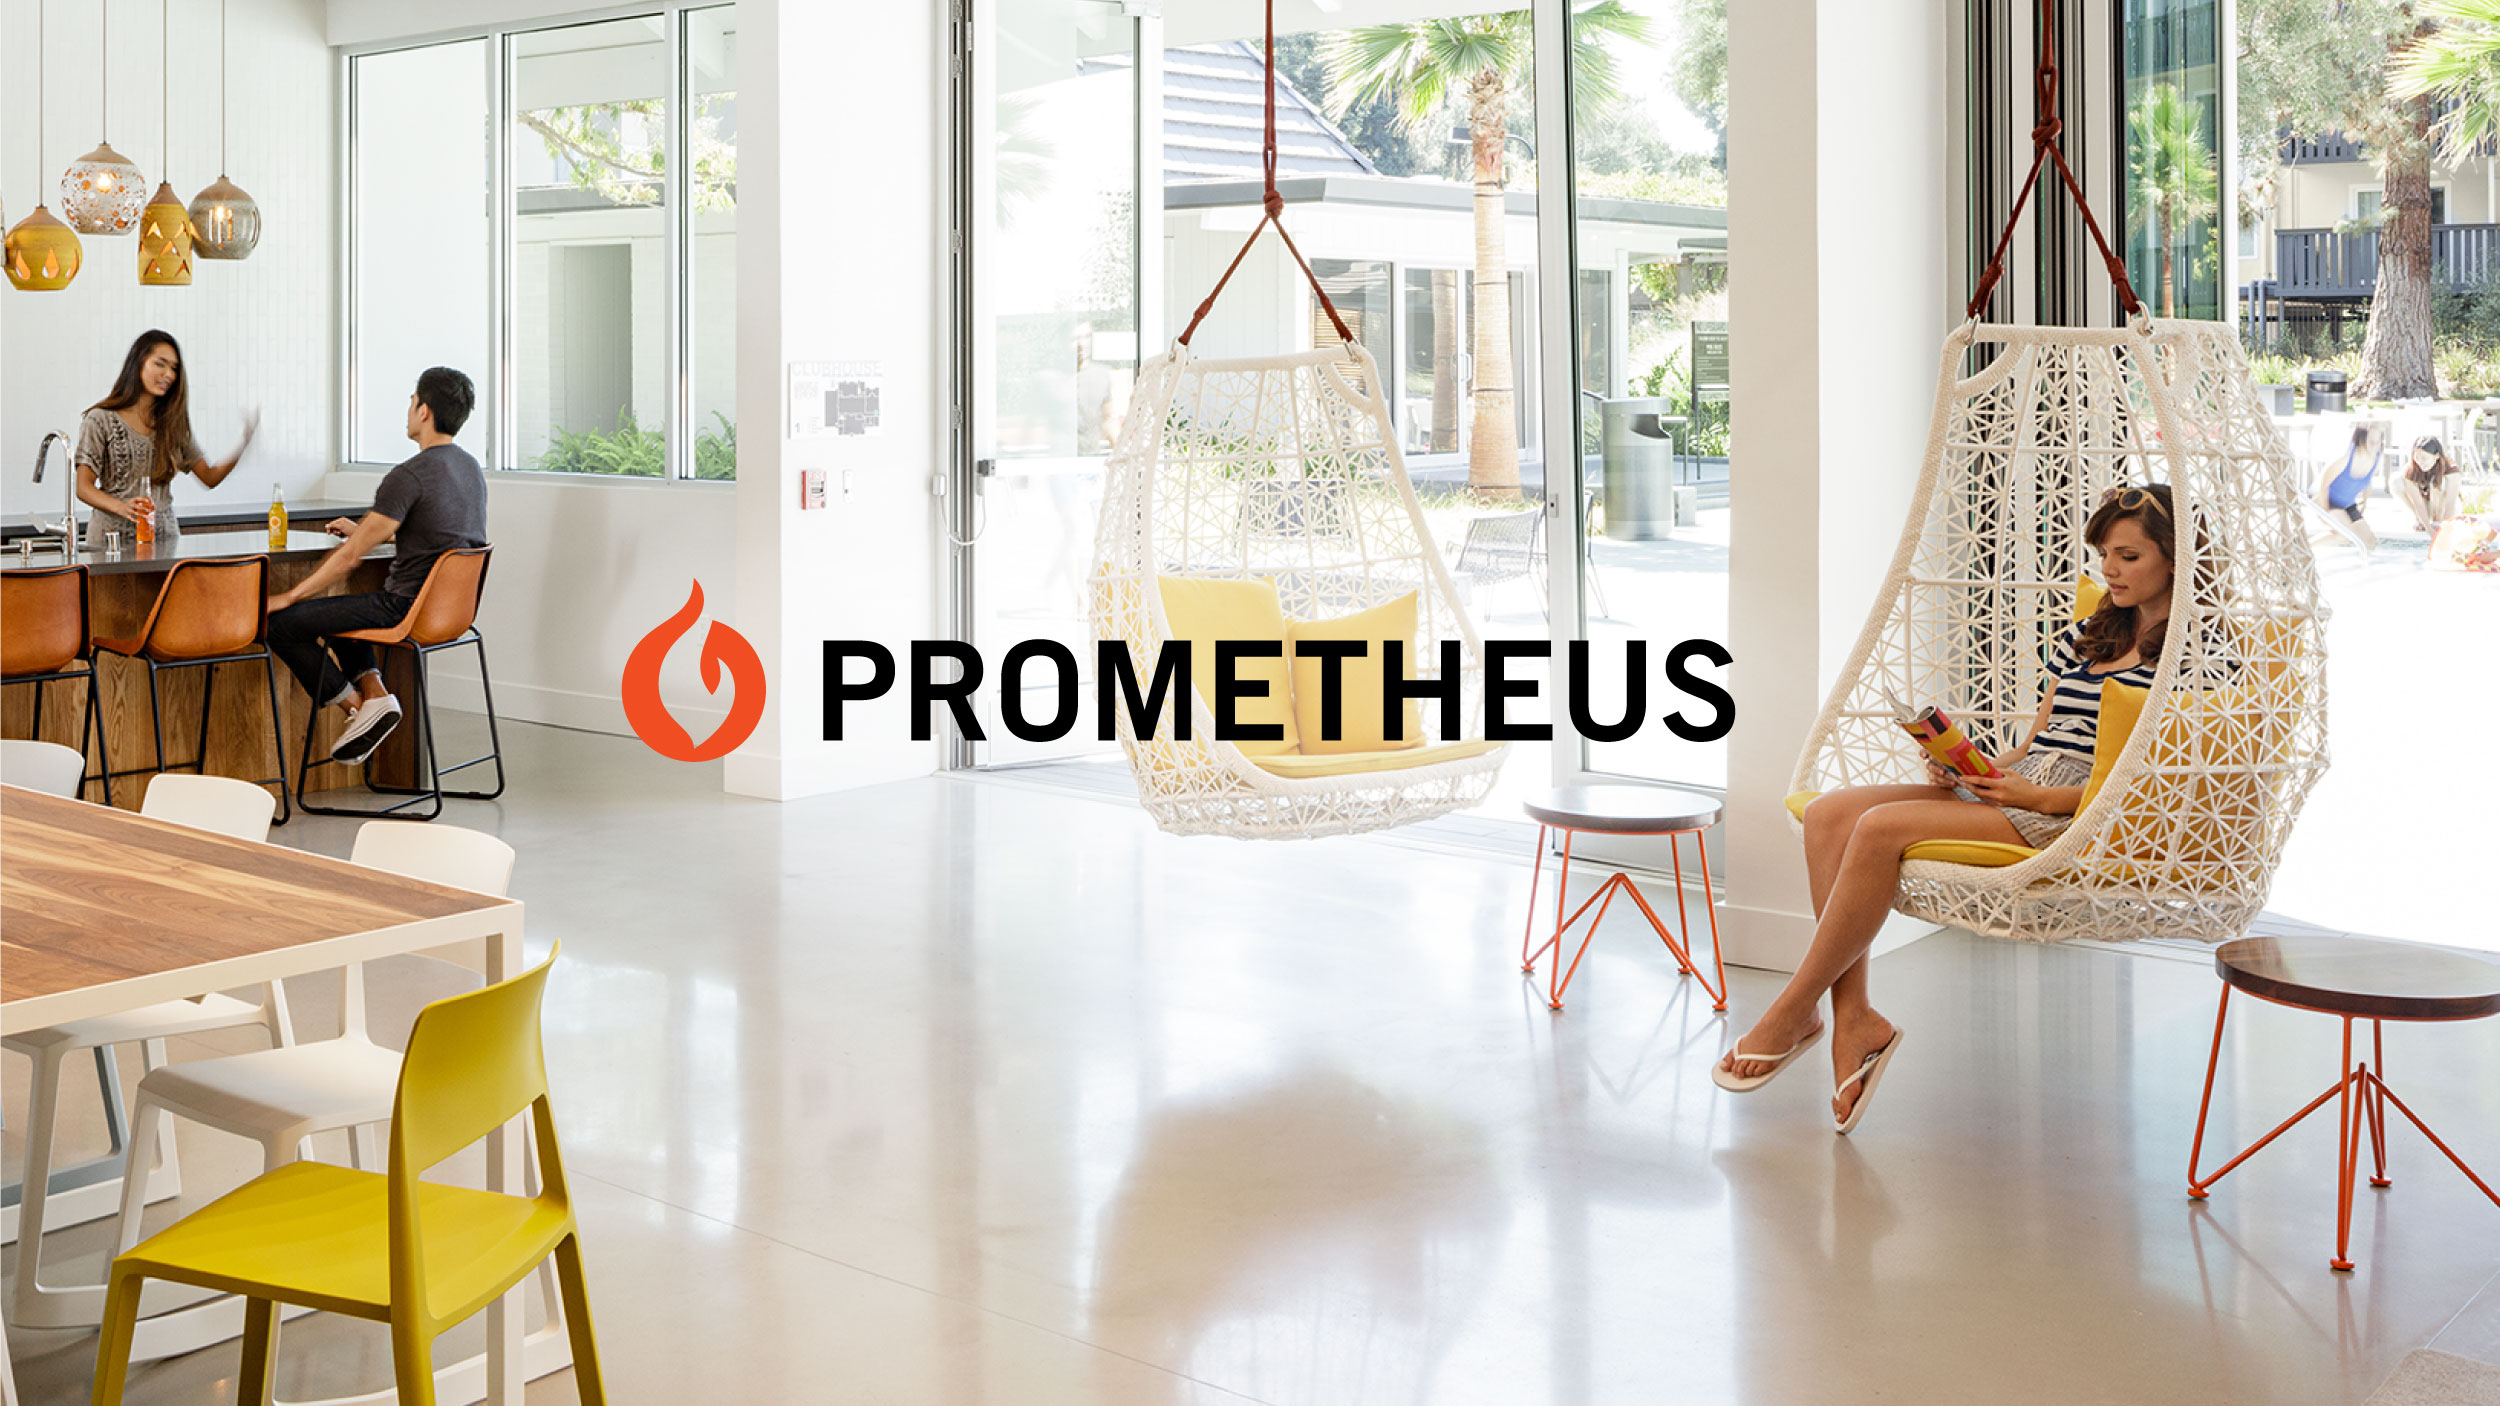 Prometheus logo on top of an image of their residential apartments.